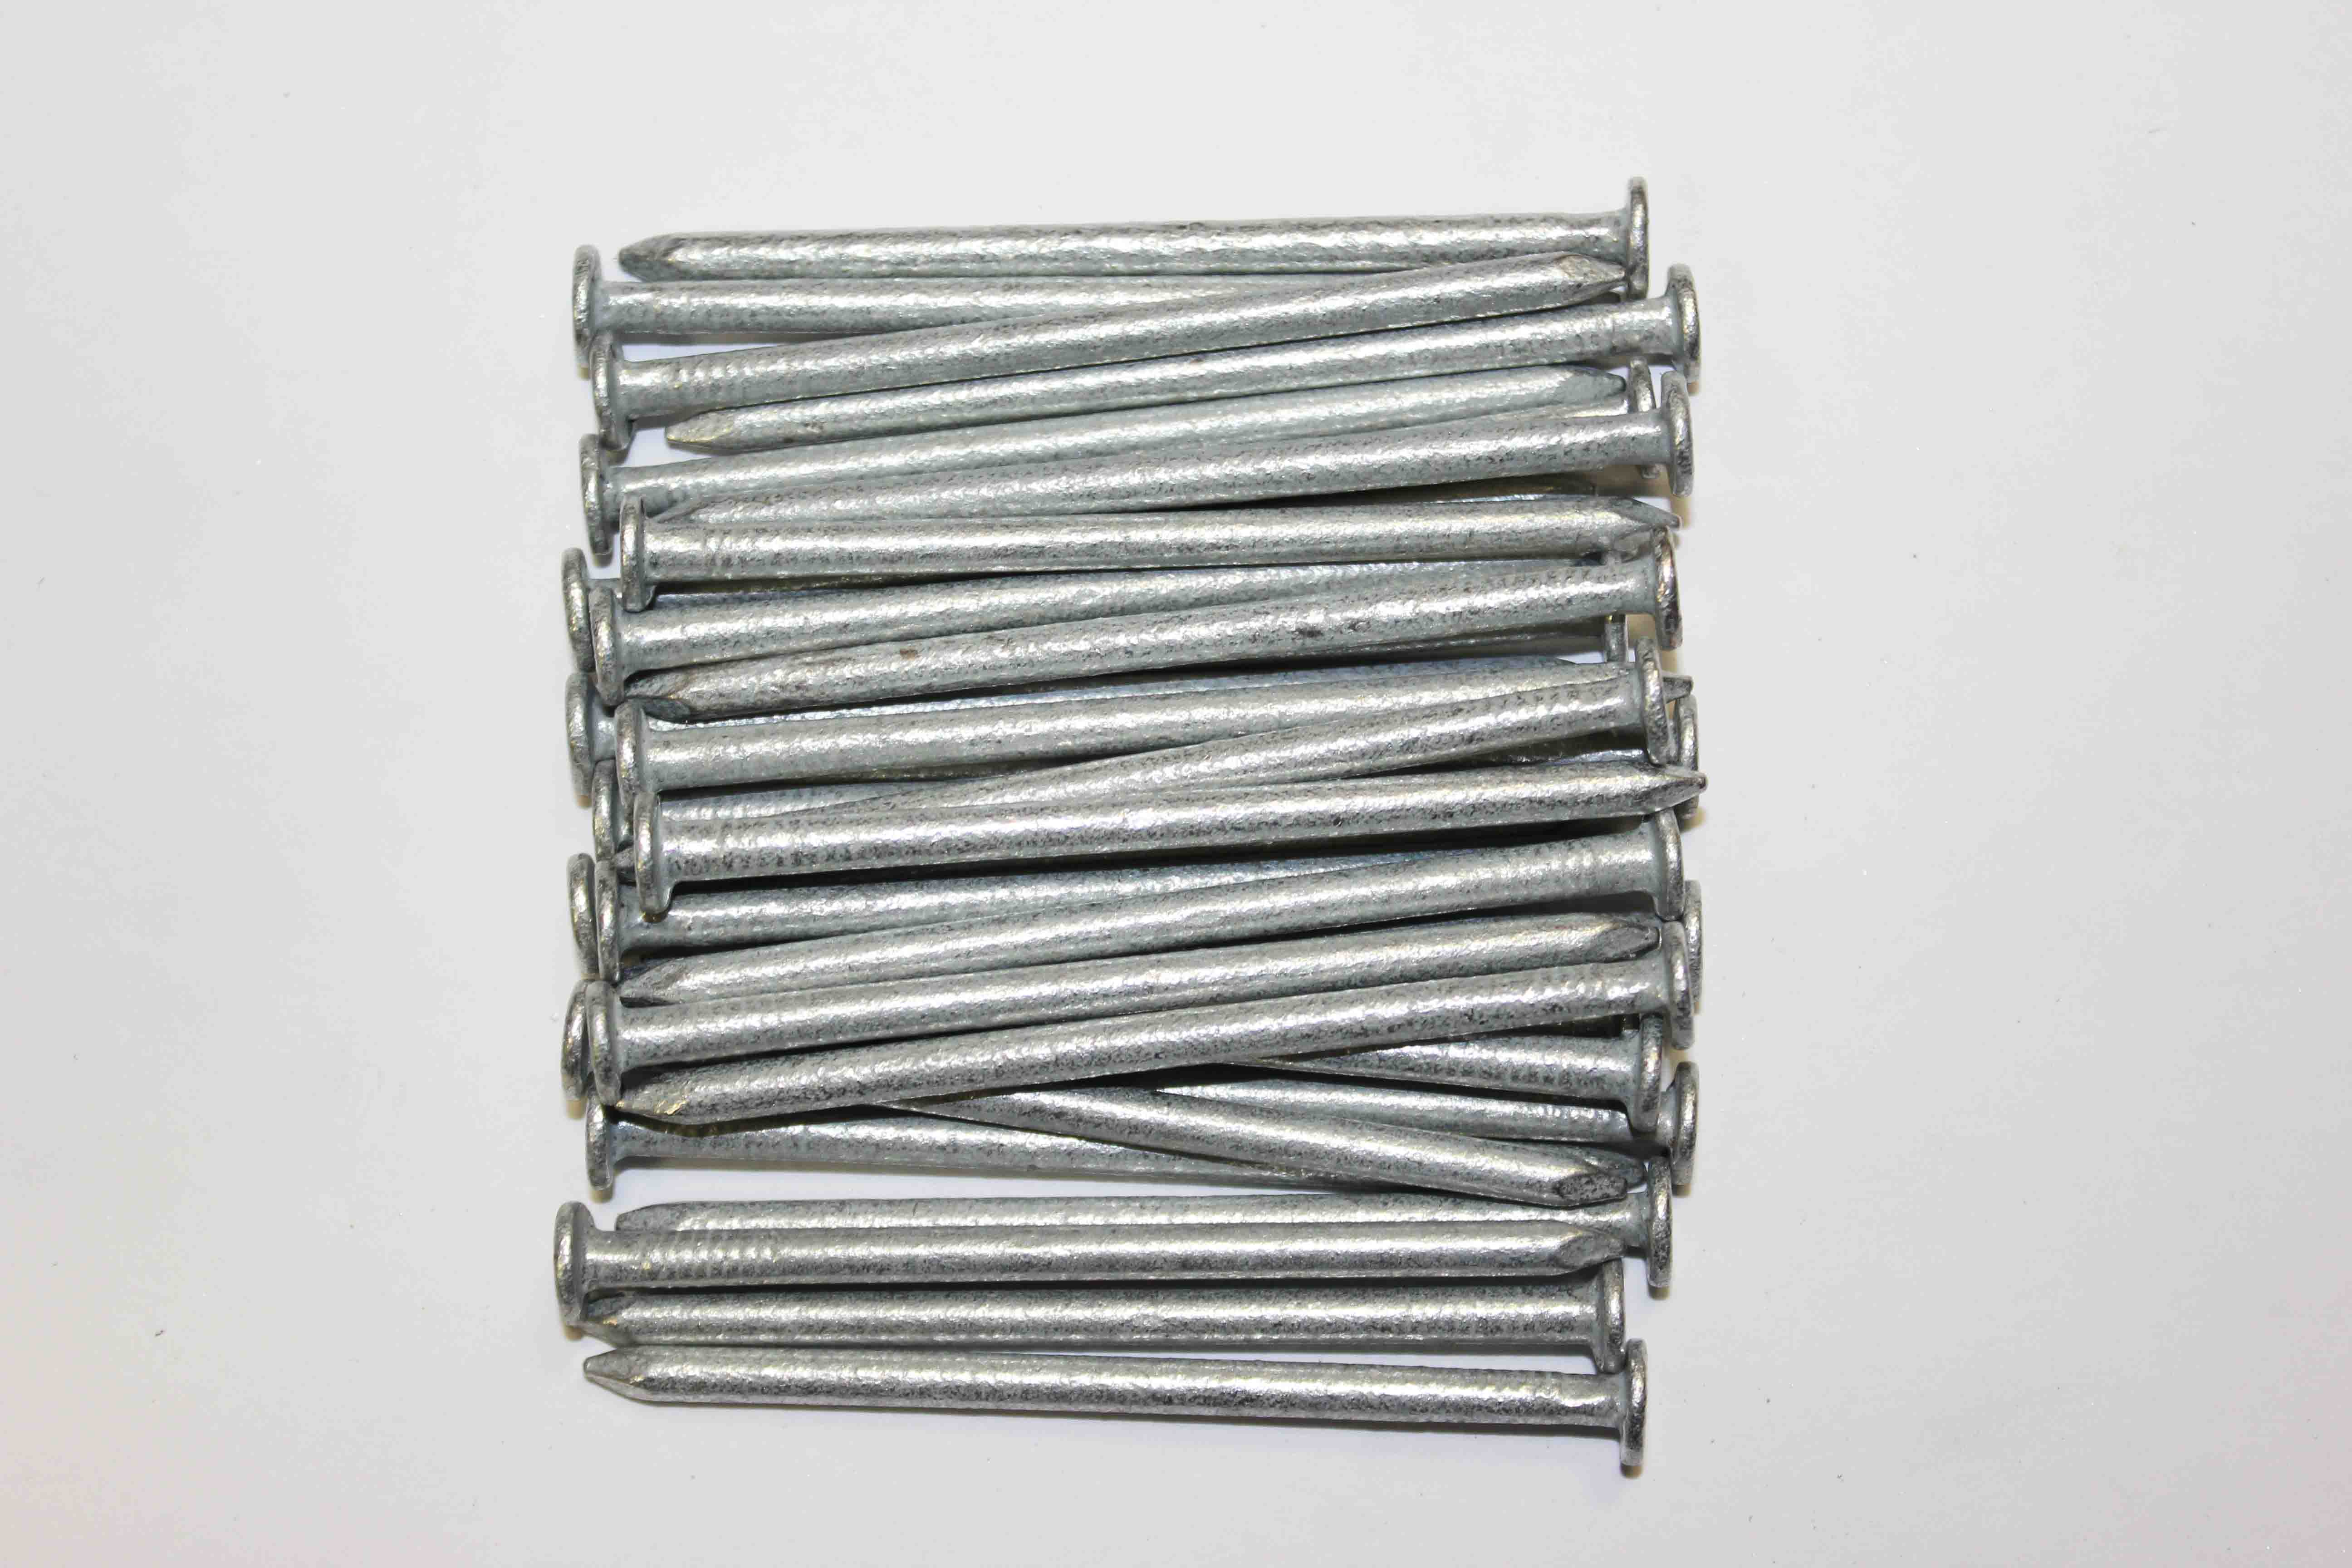 1 KG Steel Round Wire Nails Koelner High Quality ALL LENGTHS AND DIAMETERS